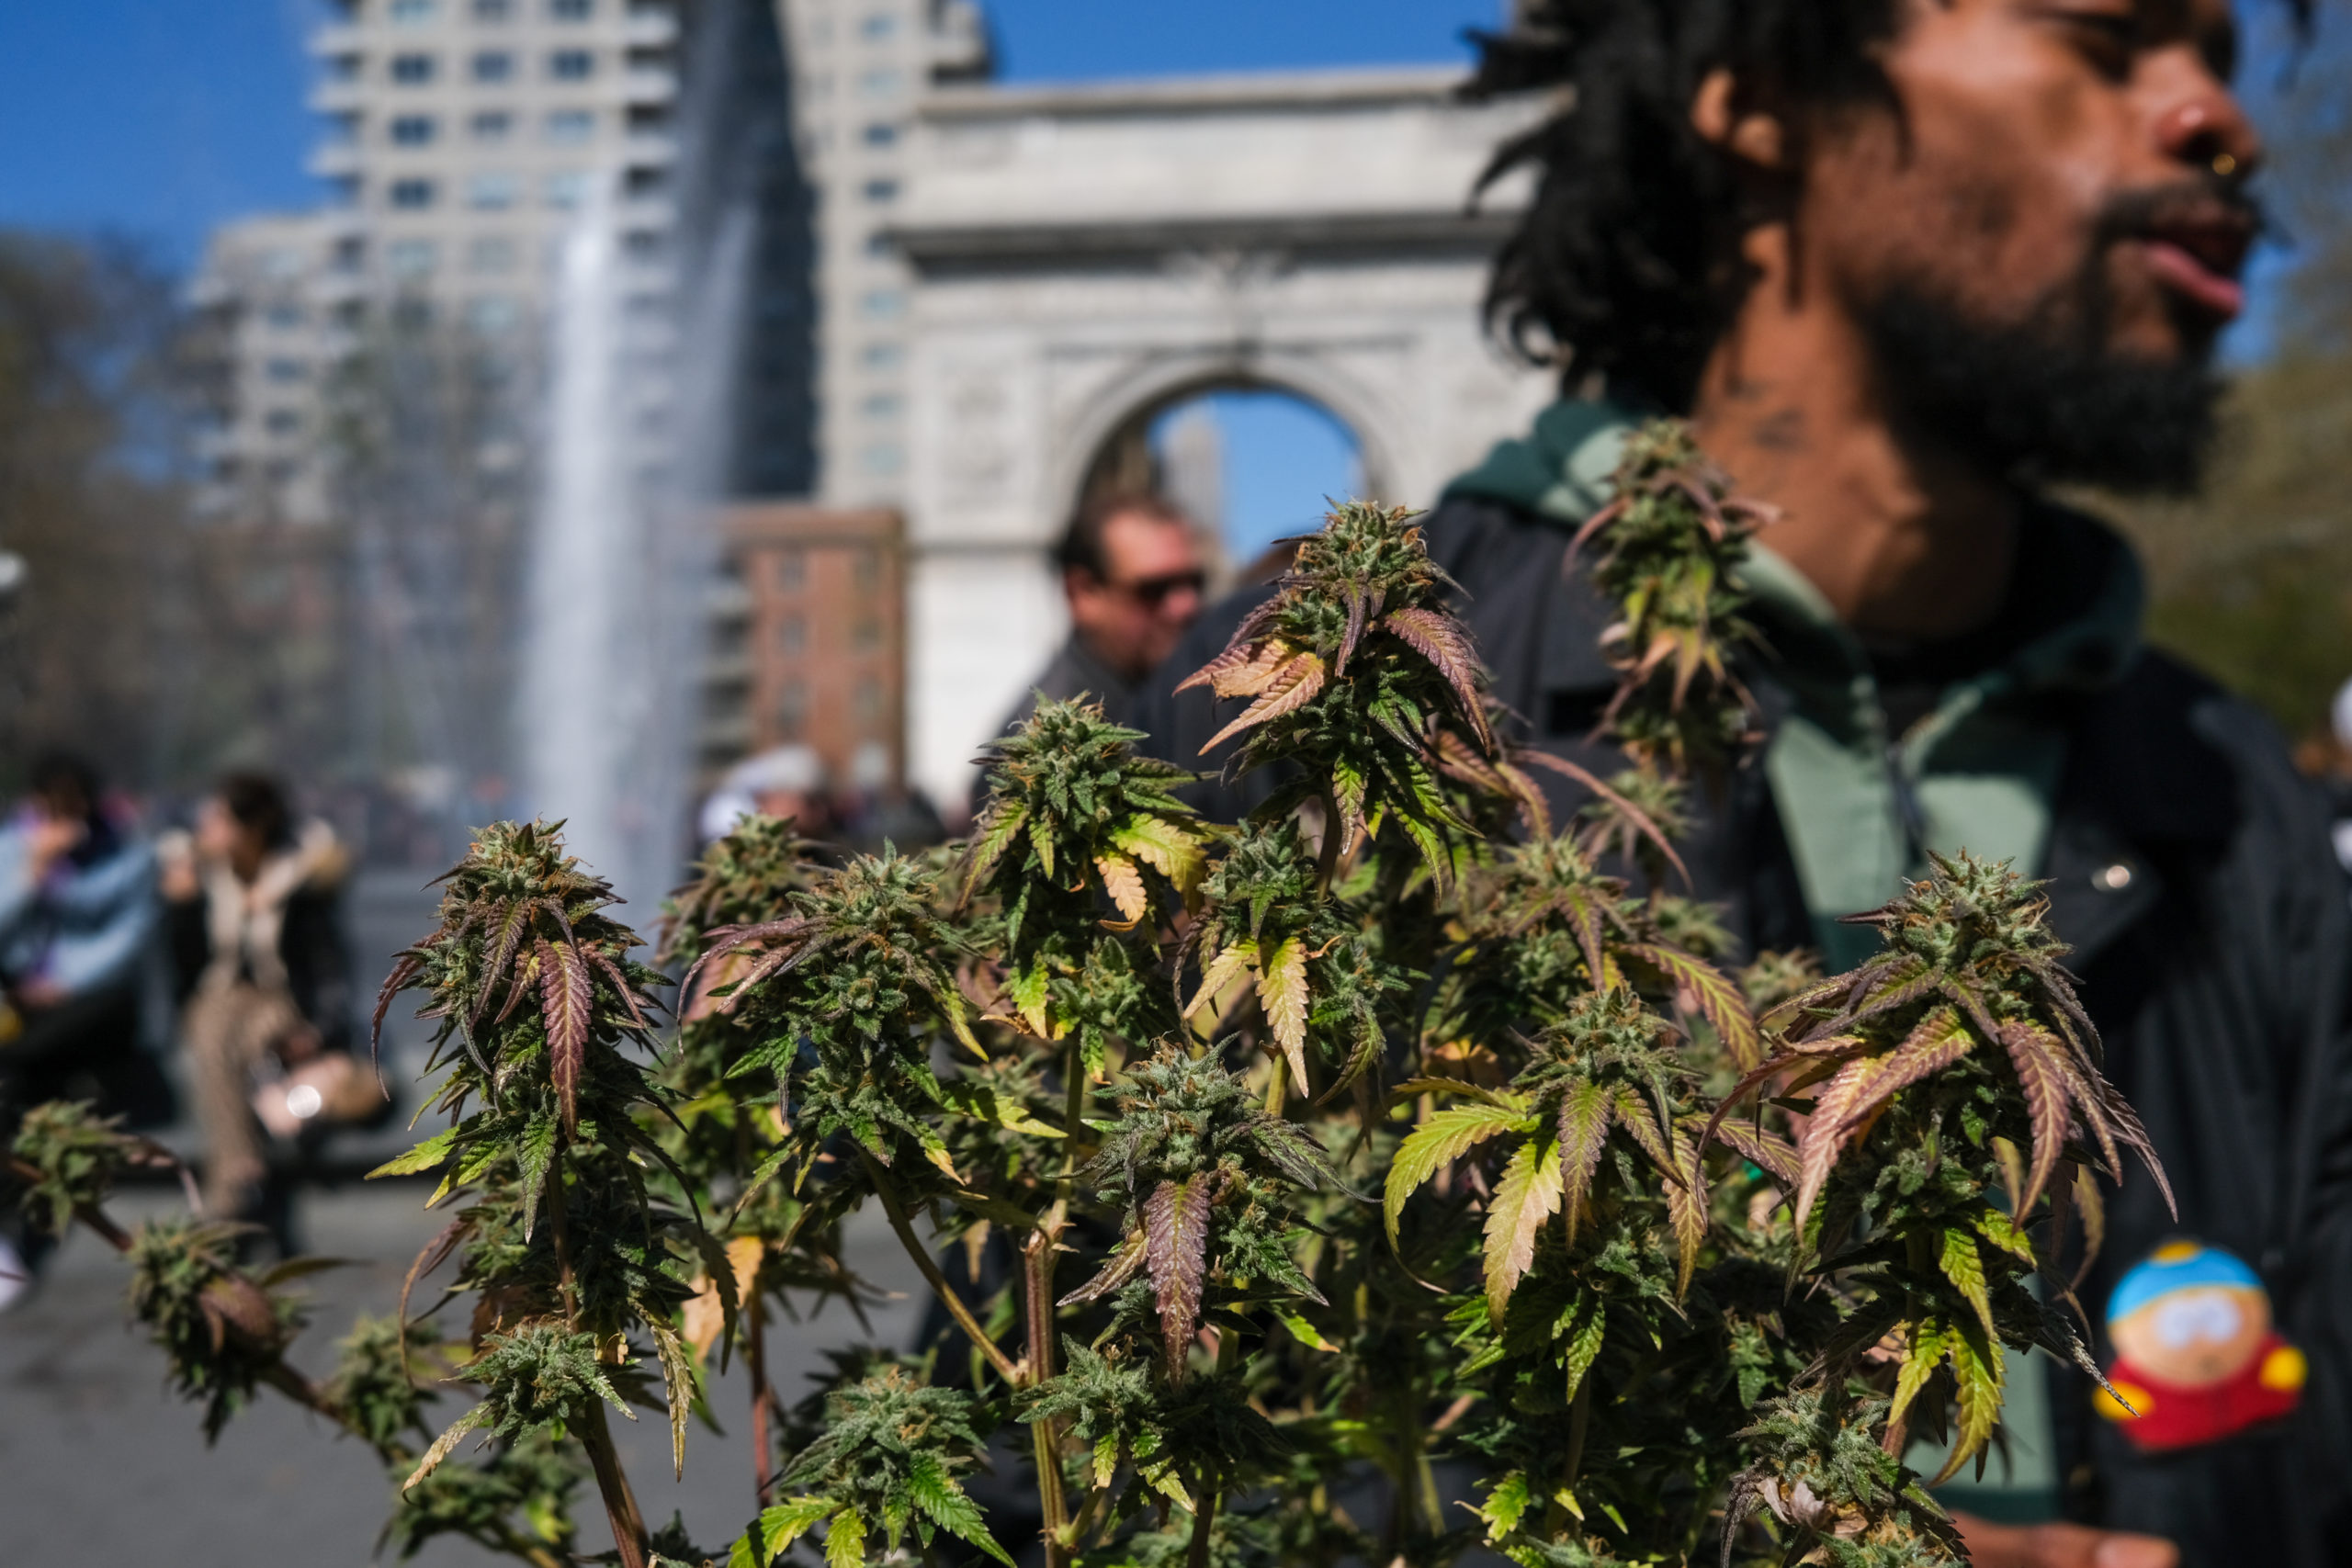 New Yorkers Celebrate 4/20 Day In Washington Square Park